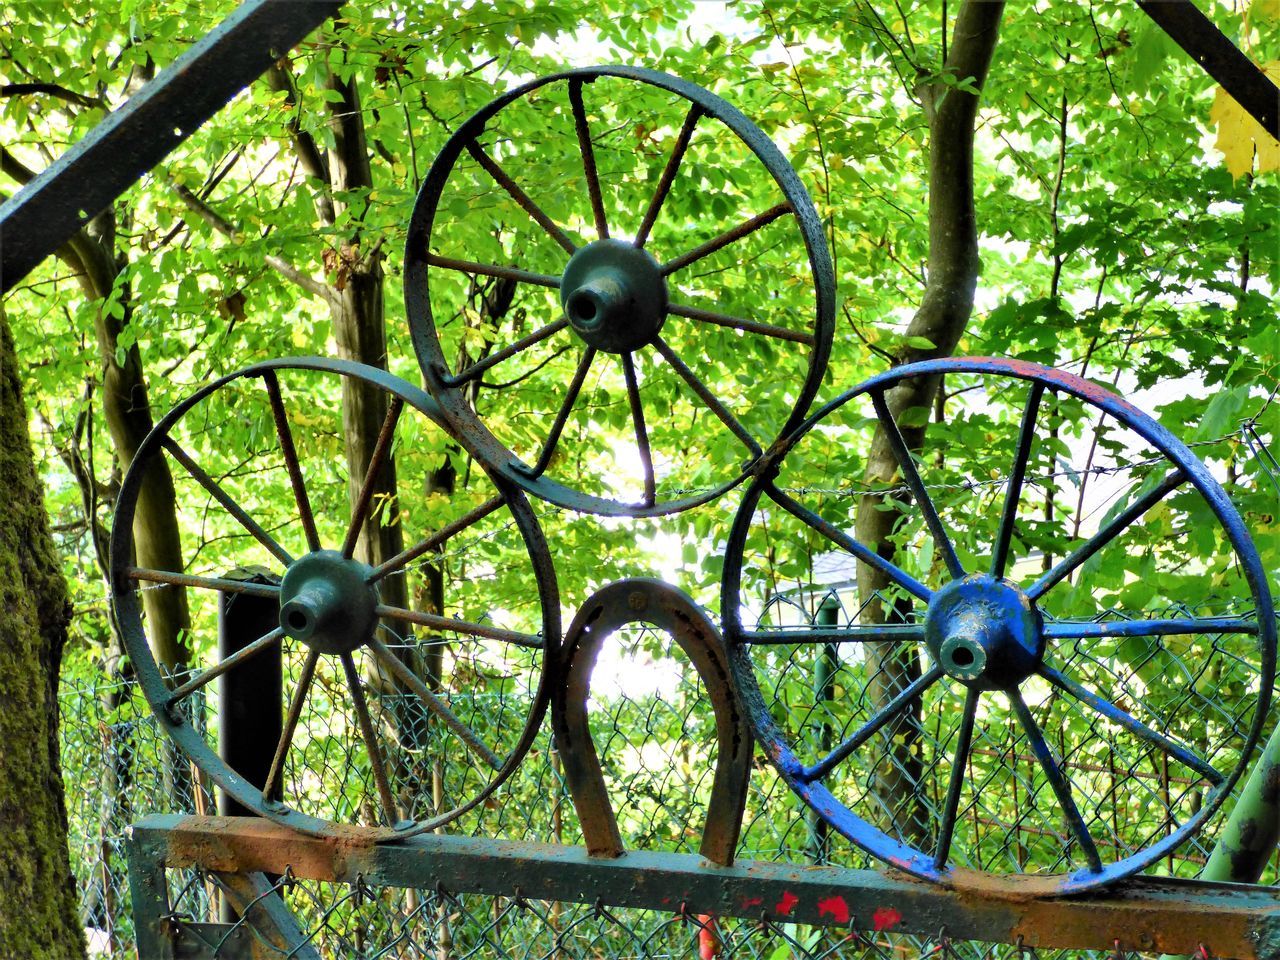 plant, wheel, no people, tree, day, metal, nature, green, outdoors, flower, iron, architecture, growth, circle